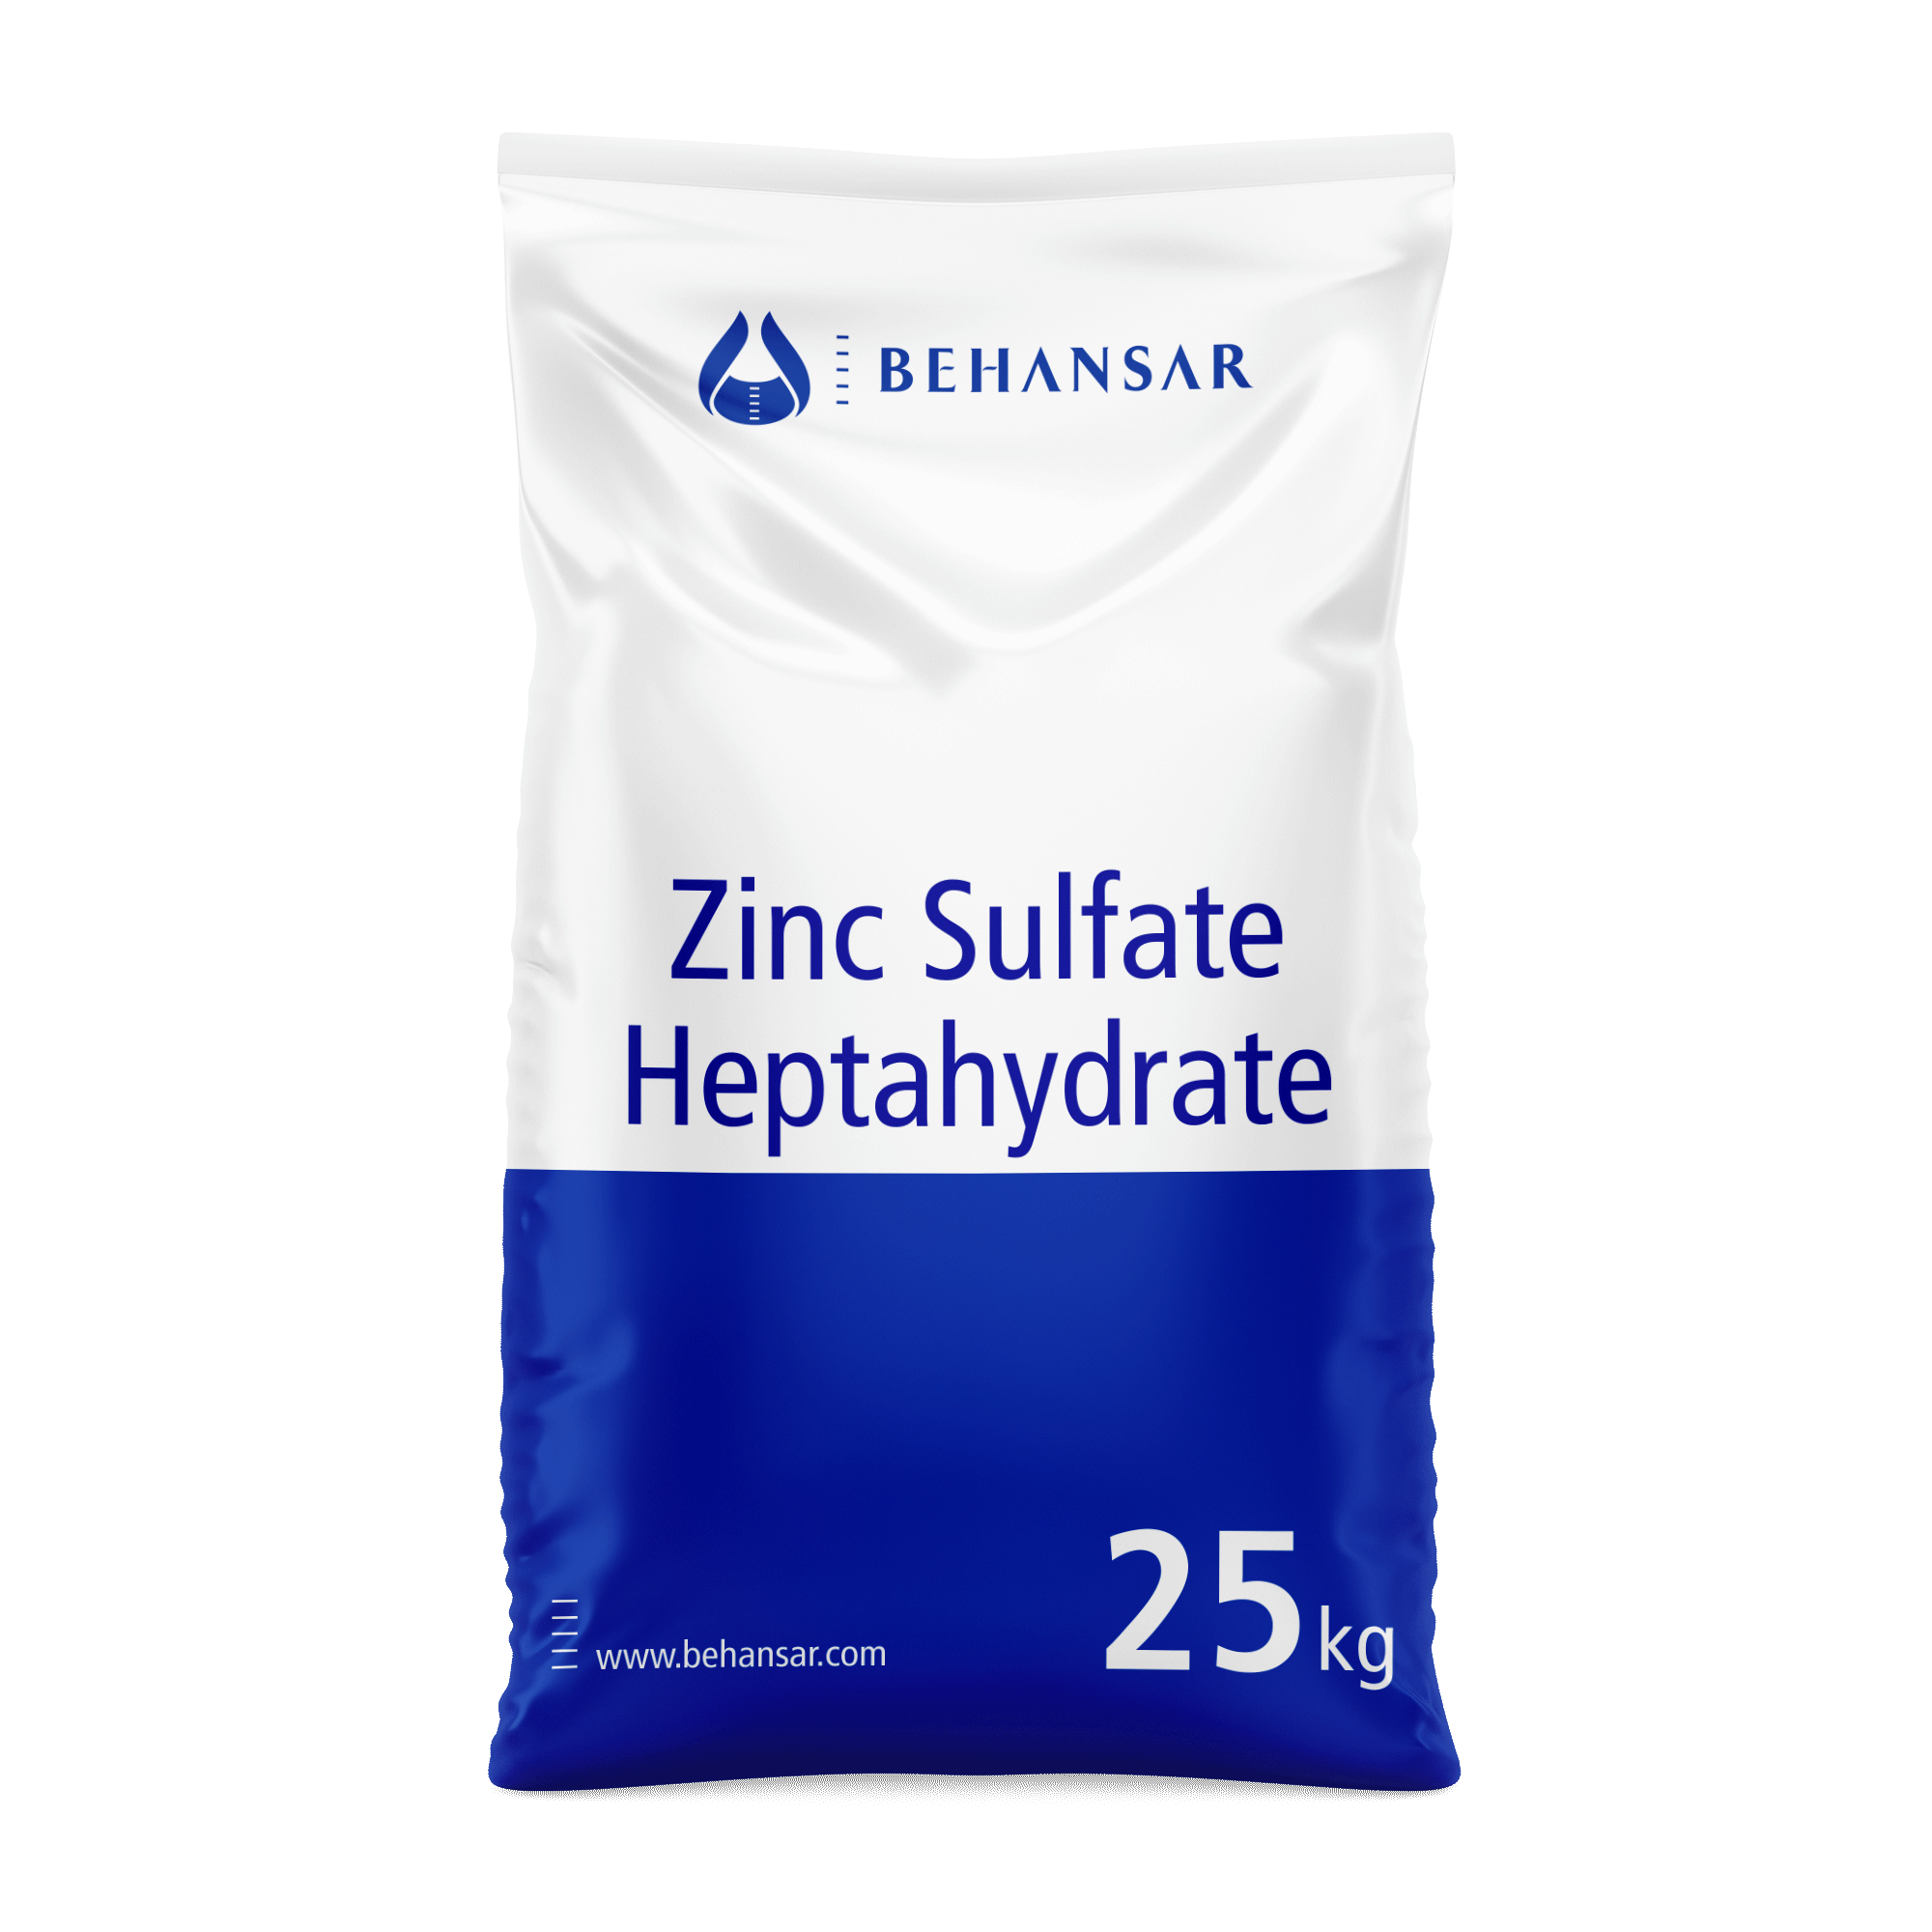 Zinc Sulfate Heptahydrate is one of the products of Behansar Co